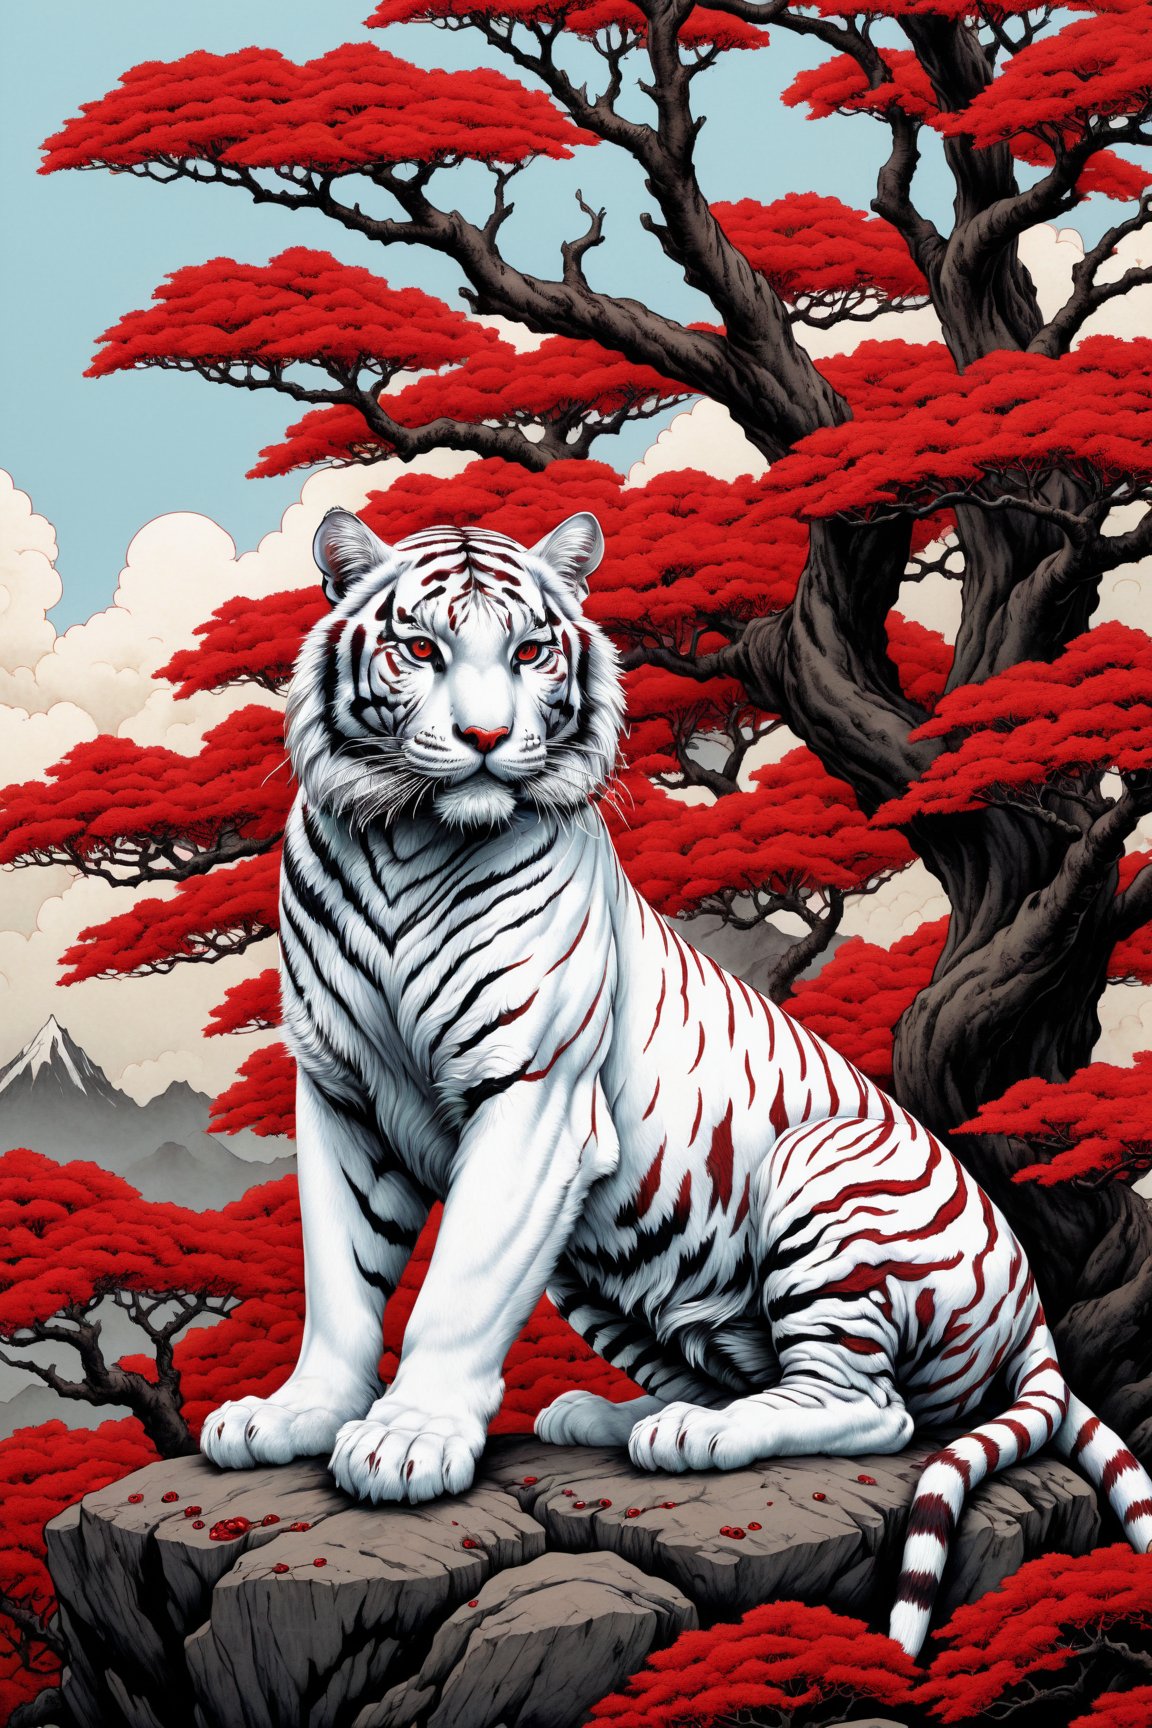 Masterpiece,a full shot of a sitting white tiger on top of a pile of red skulls behind it a beautiful female,tree highly detailed colored illustration for a tattoo,sexy body, detailed artwork, in the art style of ukiyo-e, art cover illustration, Keith Thompson art style,photorealistic